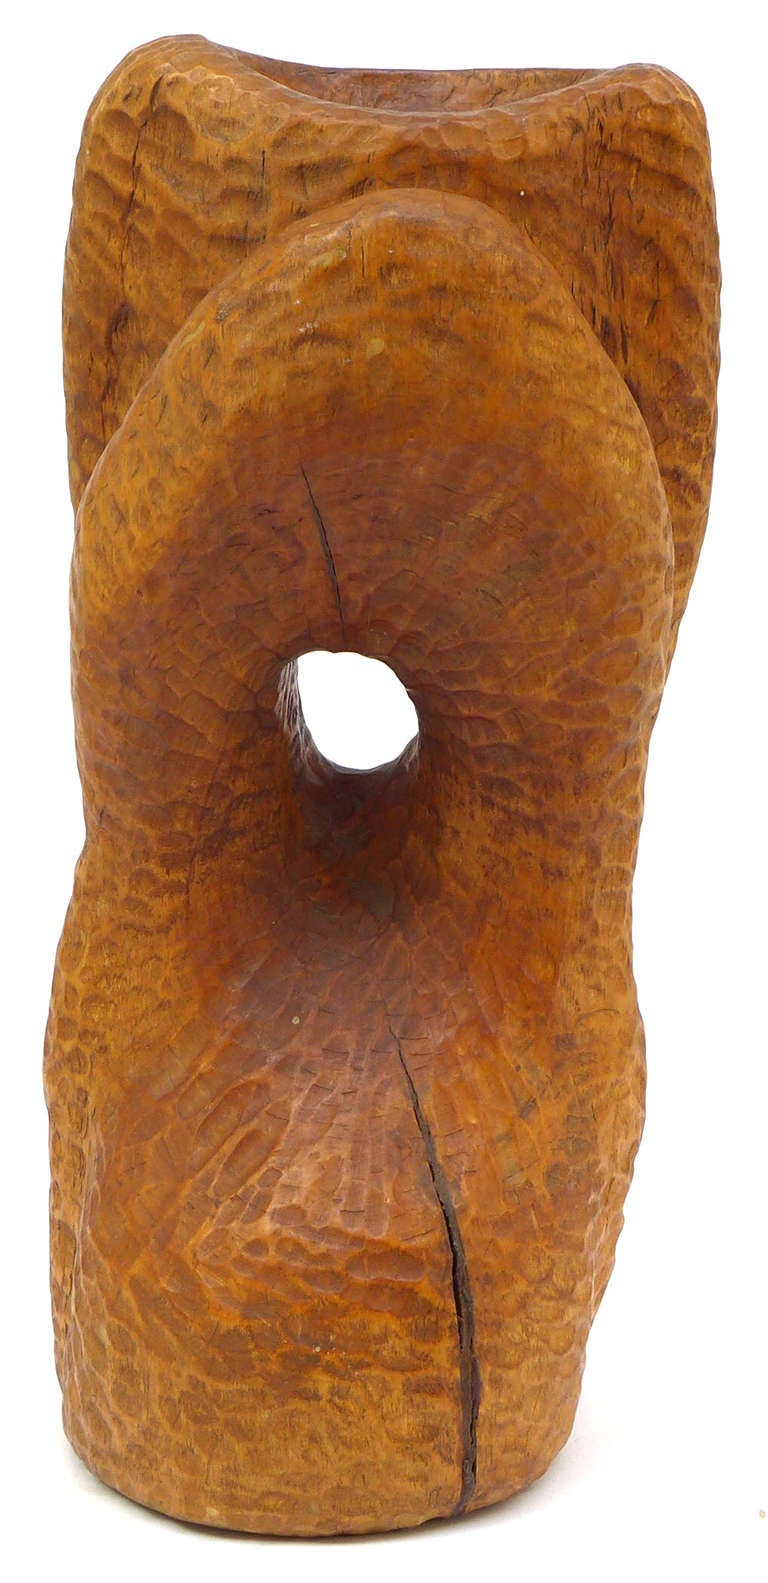 Spectacular Biomorphic Chip Carved Wood Sculpture In Excellent Condition For Sale In Los Angeles, CA